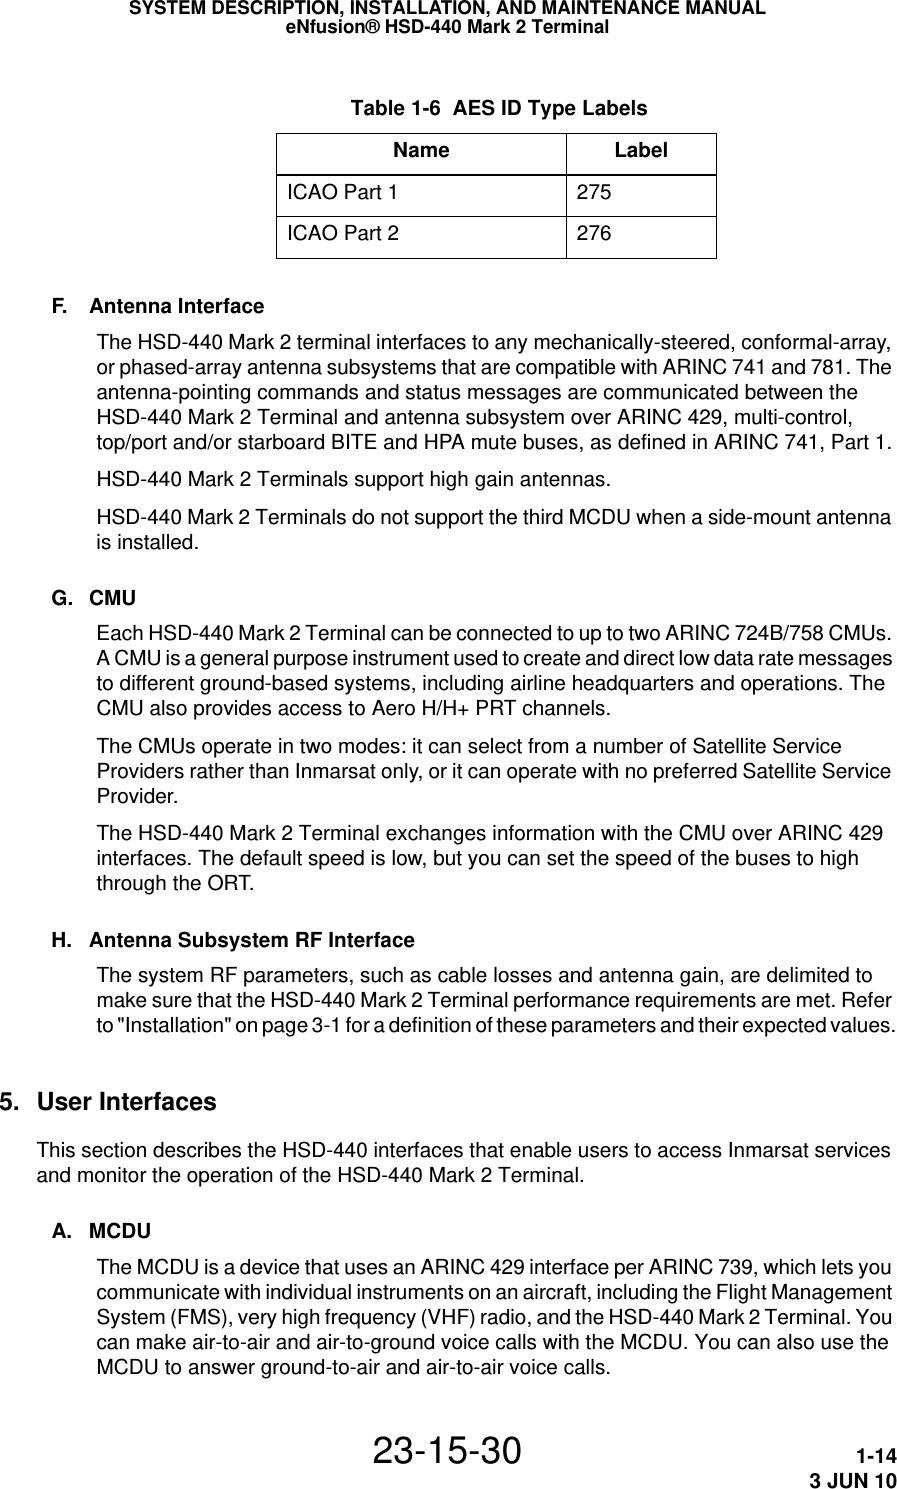  Table 1-6  AES ID Type LabelsName LabelICAO Part 1 275ICAO Part 2  276SYSTEM DESCRIPTION, INSTALLATION, AND MAINTENANCE MANUALeNfusion® HSD-440 Mark 2 Terminal23-15-30 1-143 JUN 10F. Antenna InterfaceThe HSD-440 Mark 2 terminal interfaces to any mechanically-steered, conformal-array, or phased-array antenna subsystems that are compatible with ARINC 741 and 781. The antenna-pointing commands and status messages are communicated between the HSD-440 Mark 2 Terminal and antenna subsystem over ARINC 429, multi-control, top/port and/or starboard BITE and HPA mute buses, as defined in ARINC 741, Part 1.HSD-440 Mark 2 Terminals support high gain antennas.HSD-440 Mark 2 Terminals do not support the third MCDU when a side-mount antenna is installed.G. CMUEach HSD-440 Mark 2 Terminal can be connected to up to two ARINC 724B/758 CMUs. A CMU is a general purpose instrument used to create and direct low data rate messages to different ground-based systems, including airline headquarters and operations. The CMU also provides access to Aero H/H+ PRT channels.The CMUs operate in two modes: it can select from a number of Satellite Service Providers rather than Inmarsat only, or it can operate with no preferred Satellite Service Provider.The HSD-440 Mark 2 Terminal exchanges information with the CMU over ARINC 429 interfaces. The default speed is low, but you can set the speed of the buses to high through the ORT.H. Antenna Subsystem RF InterfaceThe system RF parameters, such as cable losses and antenna gain, are delimited to make sure that the HSD-440 Mark 2 Terminal performance requirements are met. Refer to &quot;Installation&quot; on page 3-1 for a definition of these parameters and their expected values.5. User InterfacesThis section describes the HSD-440 interfaces that enable users to access Inmarsat services and monitor the operation of the HSD-440 Mark 2 Terminal.A. MCDUThe MCDU is a device that uses an ARINC 429 interface per ARINC 739, which lets you communicate with individual instruments on an aircraft, including the Flight Management System (FMS), very high frequency (VHF) radio, and the HSD-440 Mark 2 Terminal. You can make air-to-air and air-to-ground voice calls with the MCDU. You can also use the MCDU to answer ground-to-air and air-to-air voice calls.